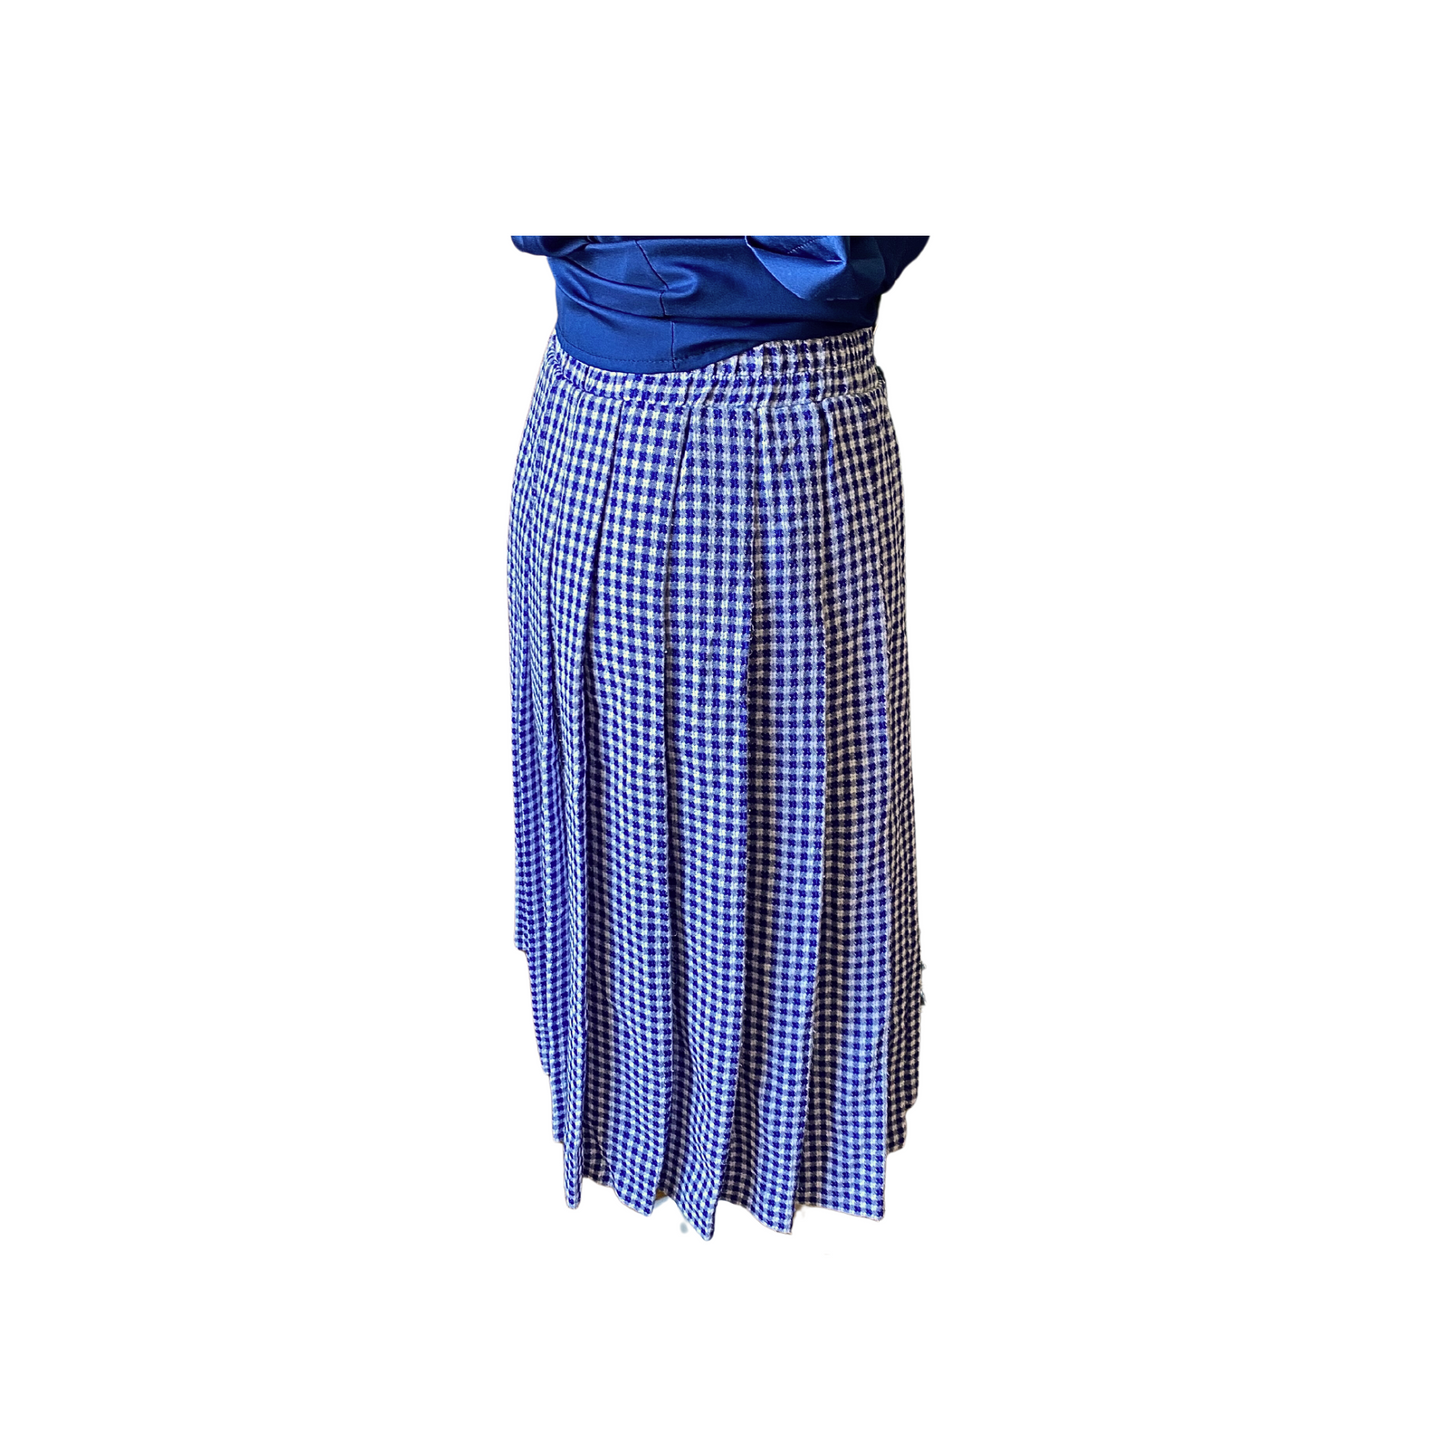 Elasticated waist midi skirt in blue and white gingham - timeless fashion